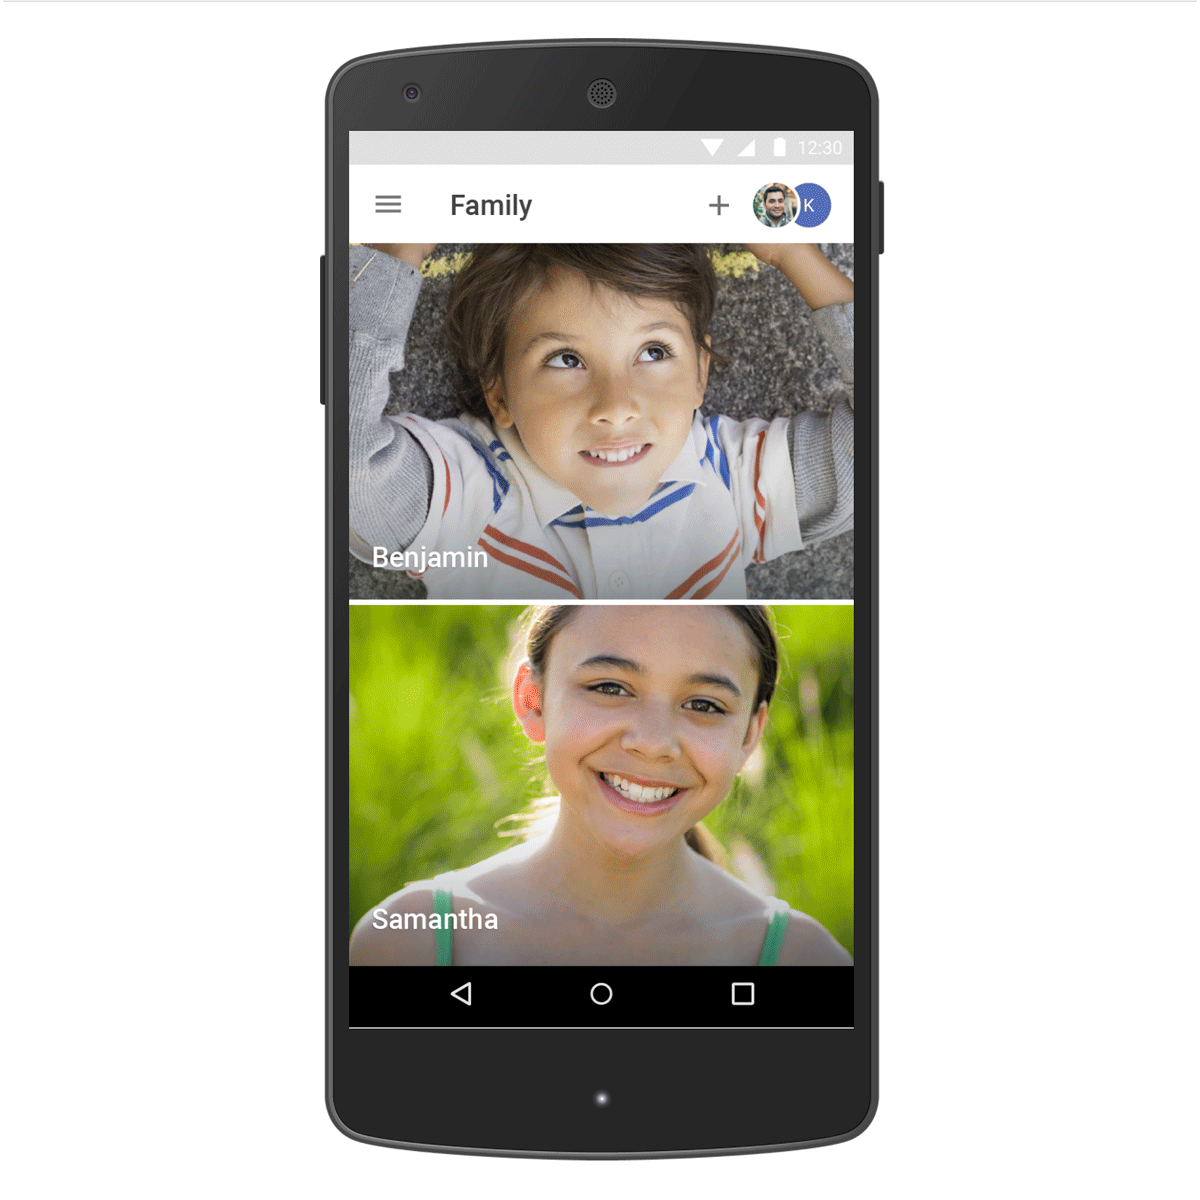 Making Android better for kids and families